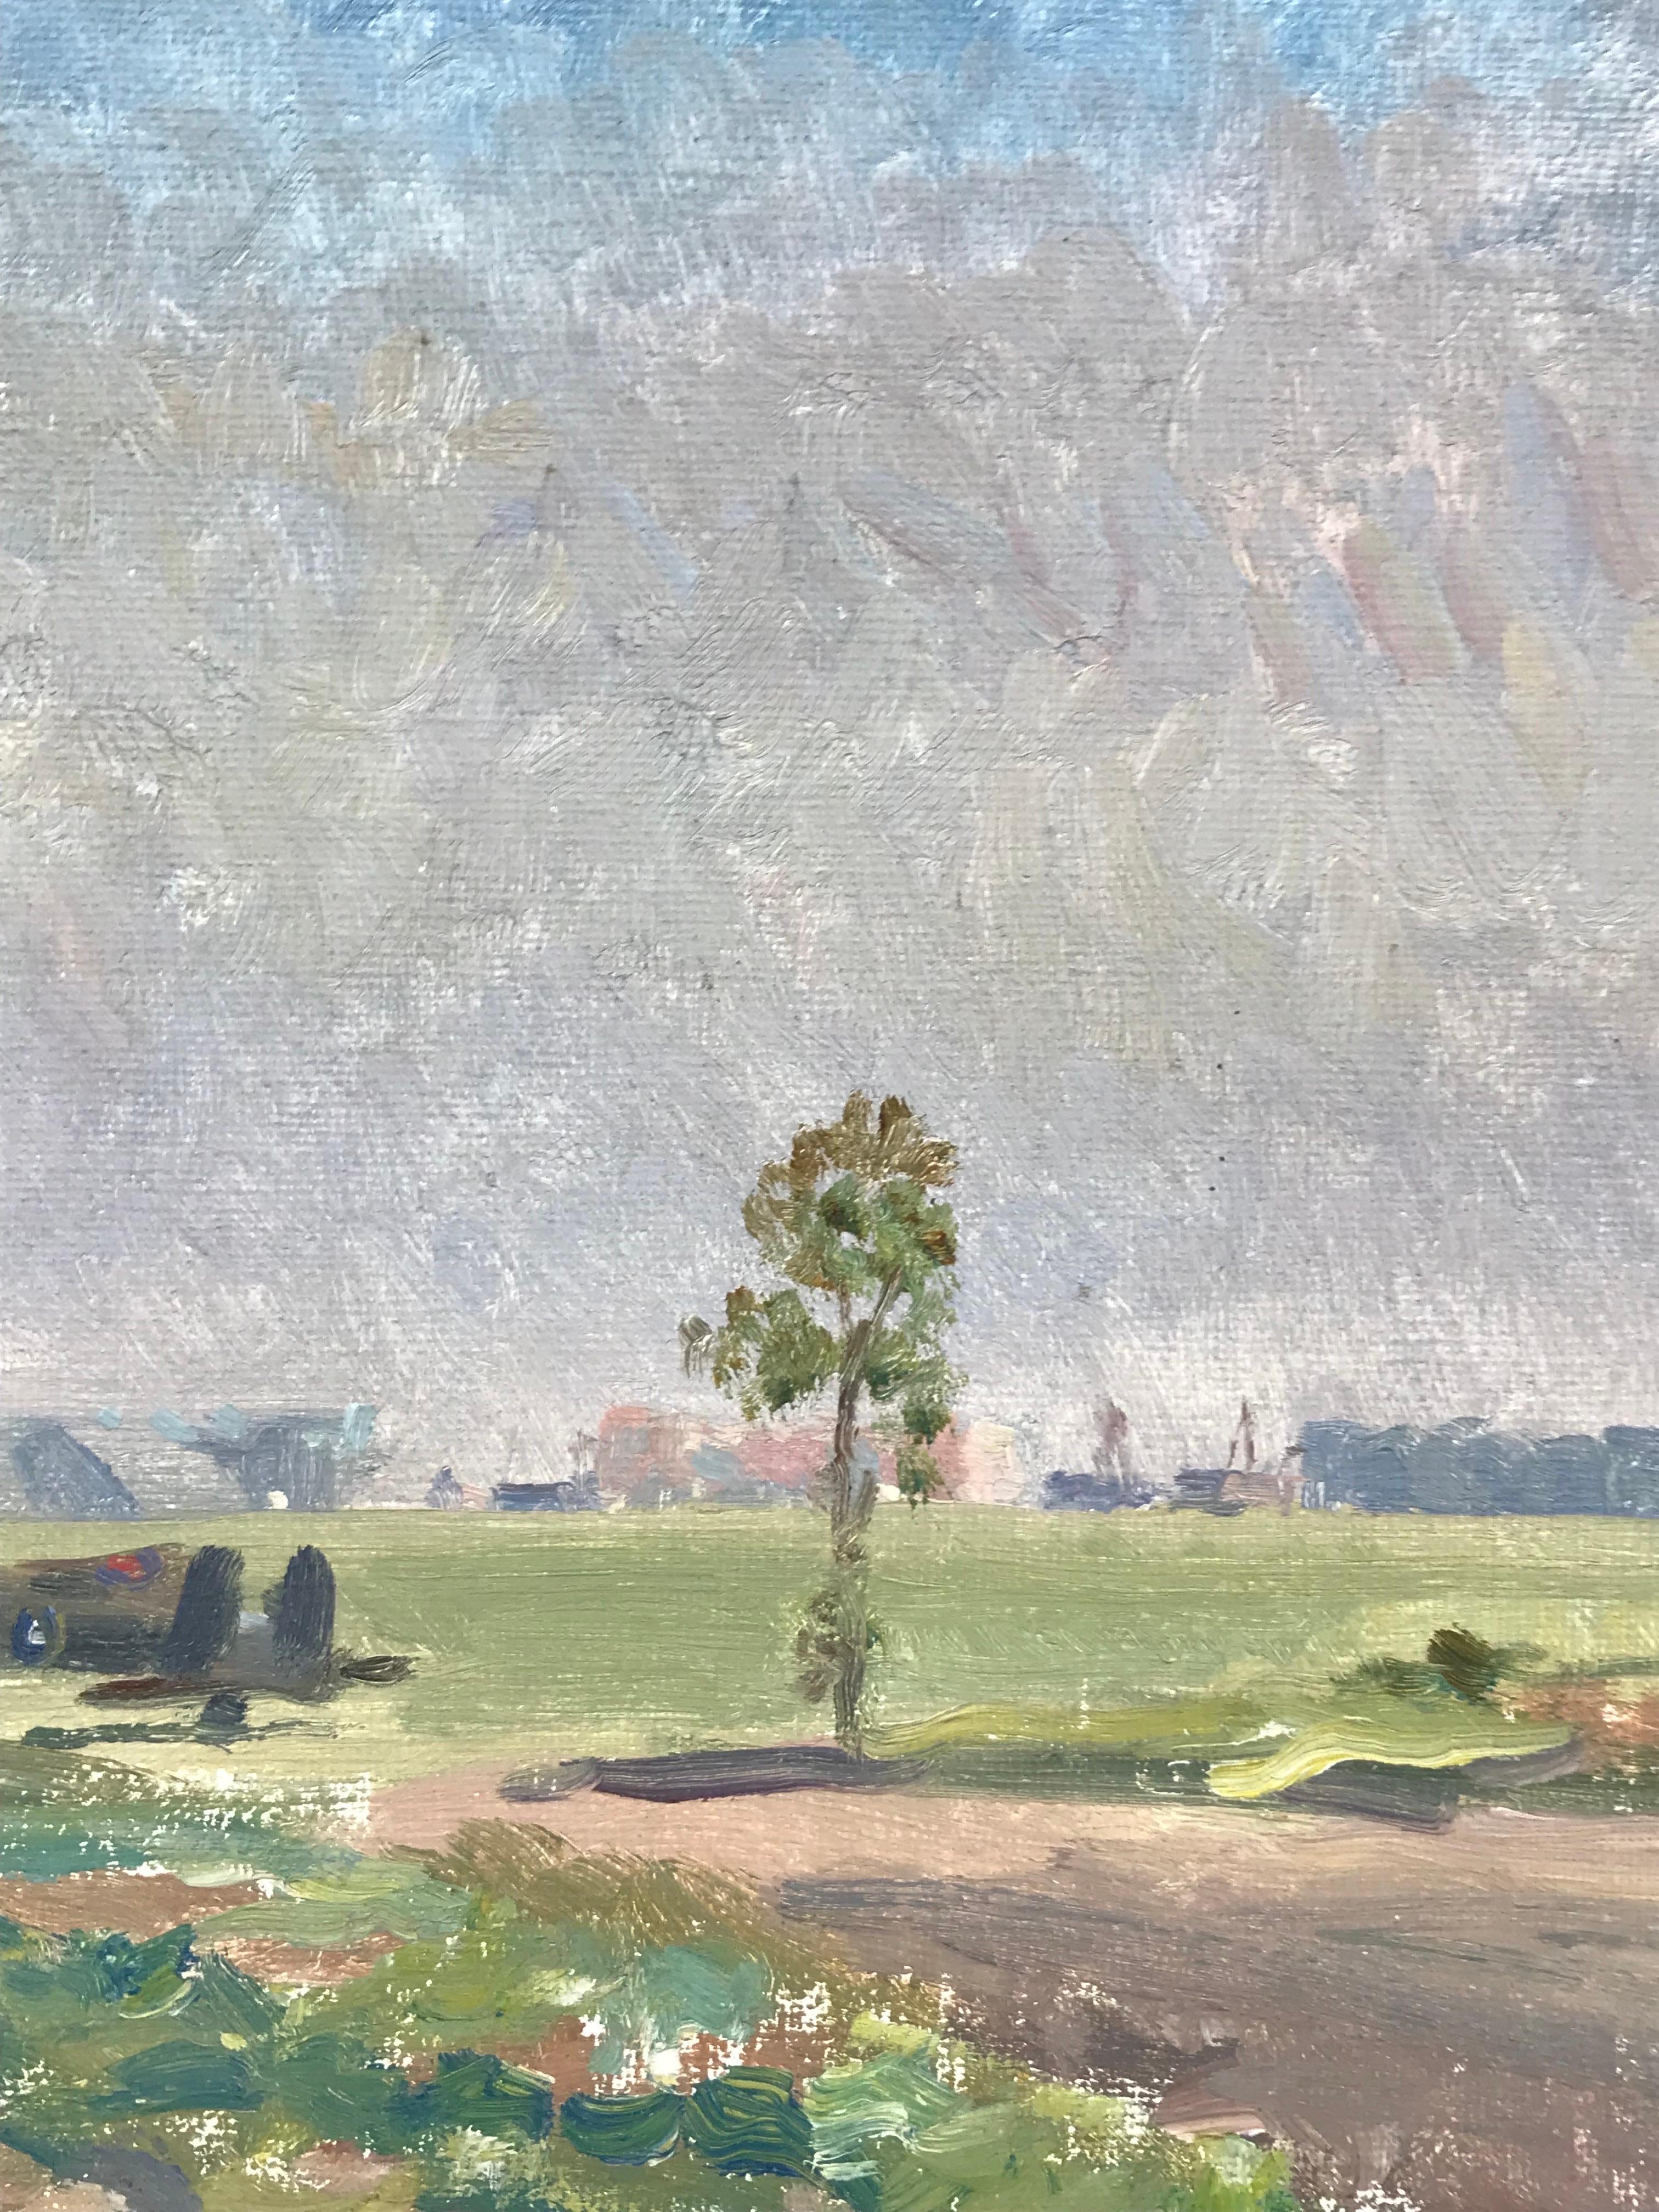 Artist: British School, mid 20th century

Title: Spitfire (?) plane in field

Medium: oil painting on board , unframed

Size: 10 x 14 inches

Condition: very good and presentable

Provenance: UK collection